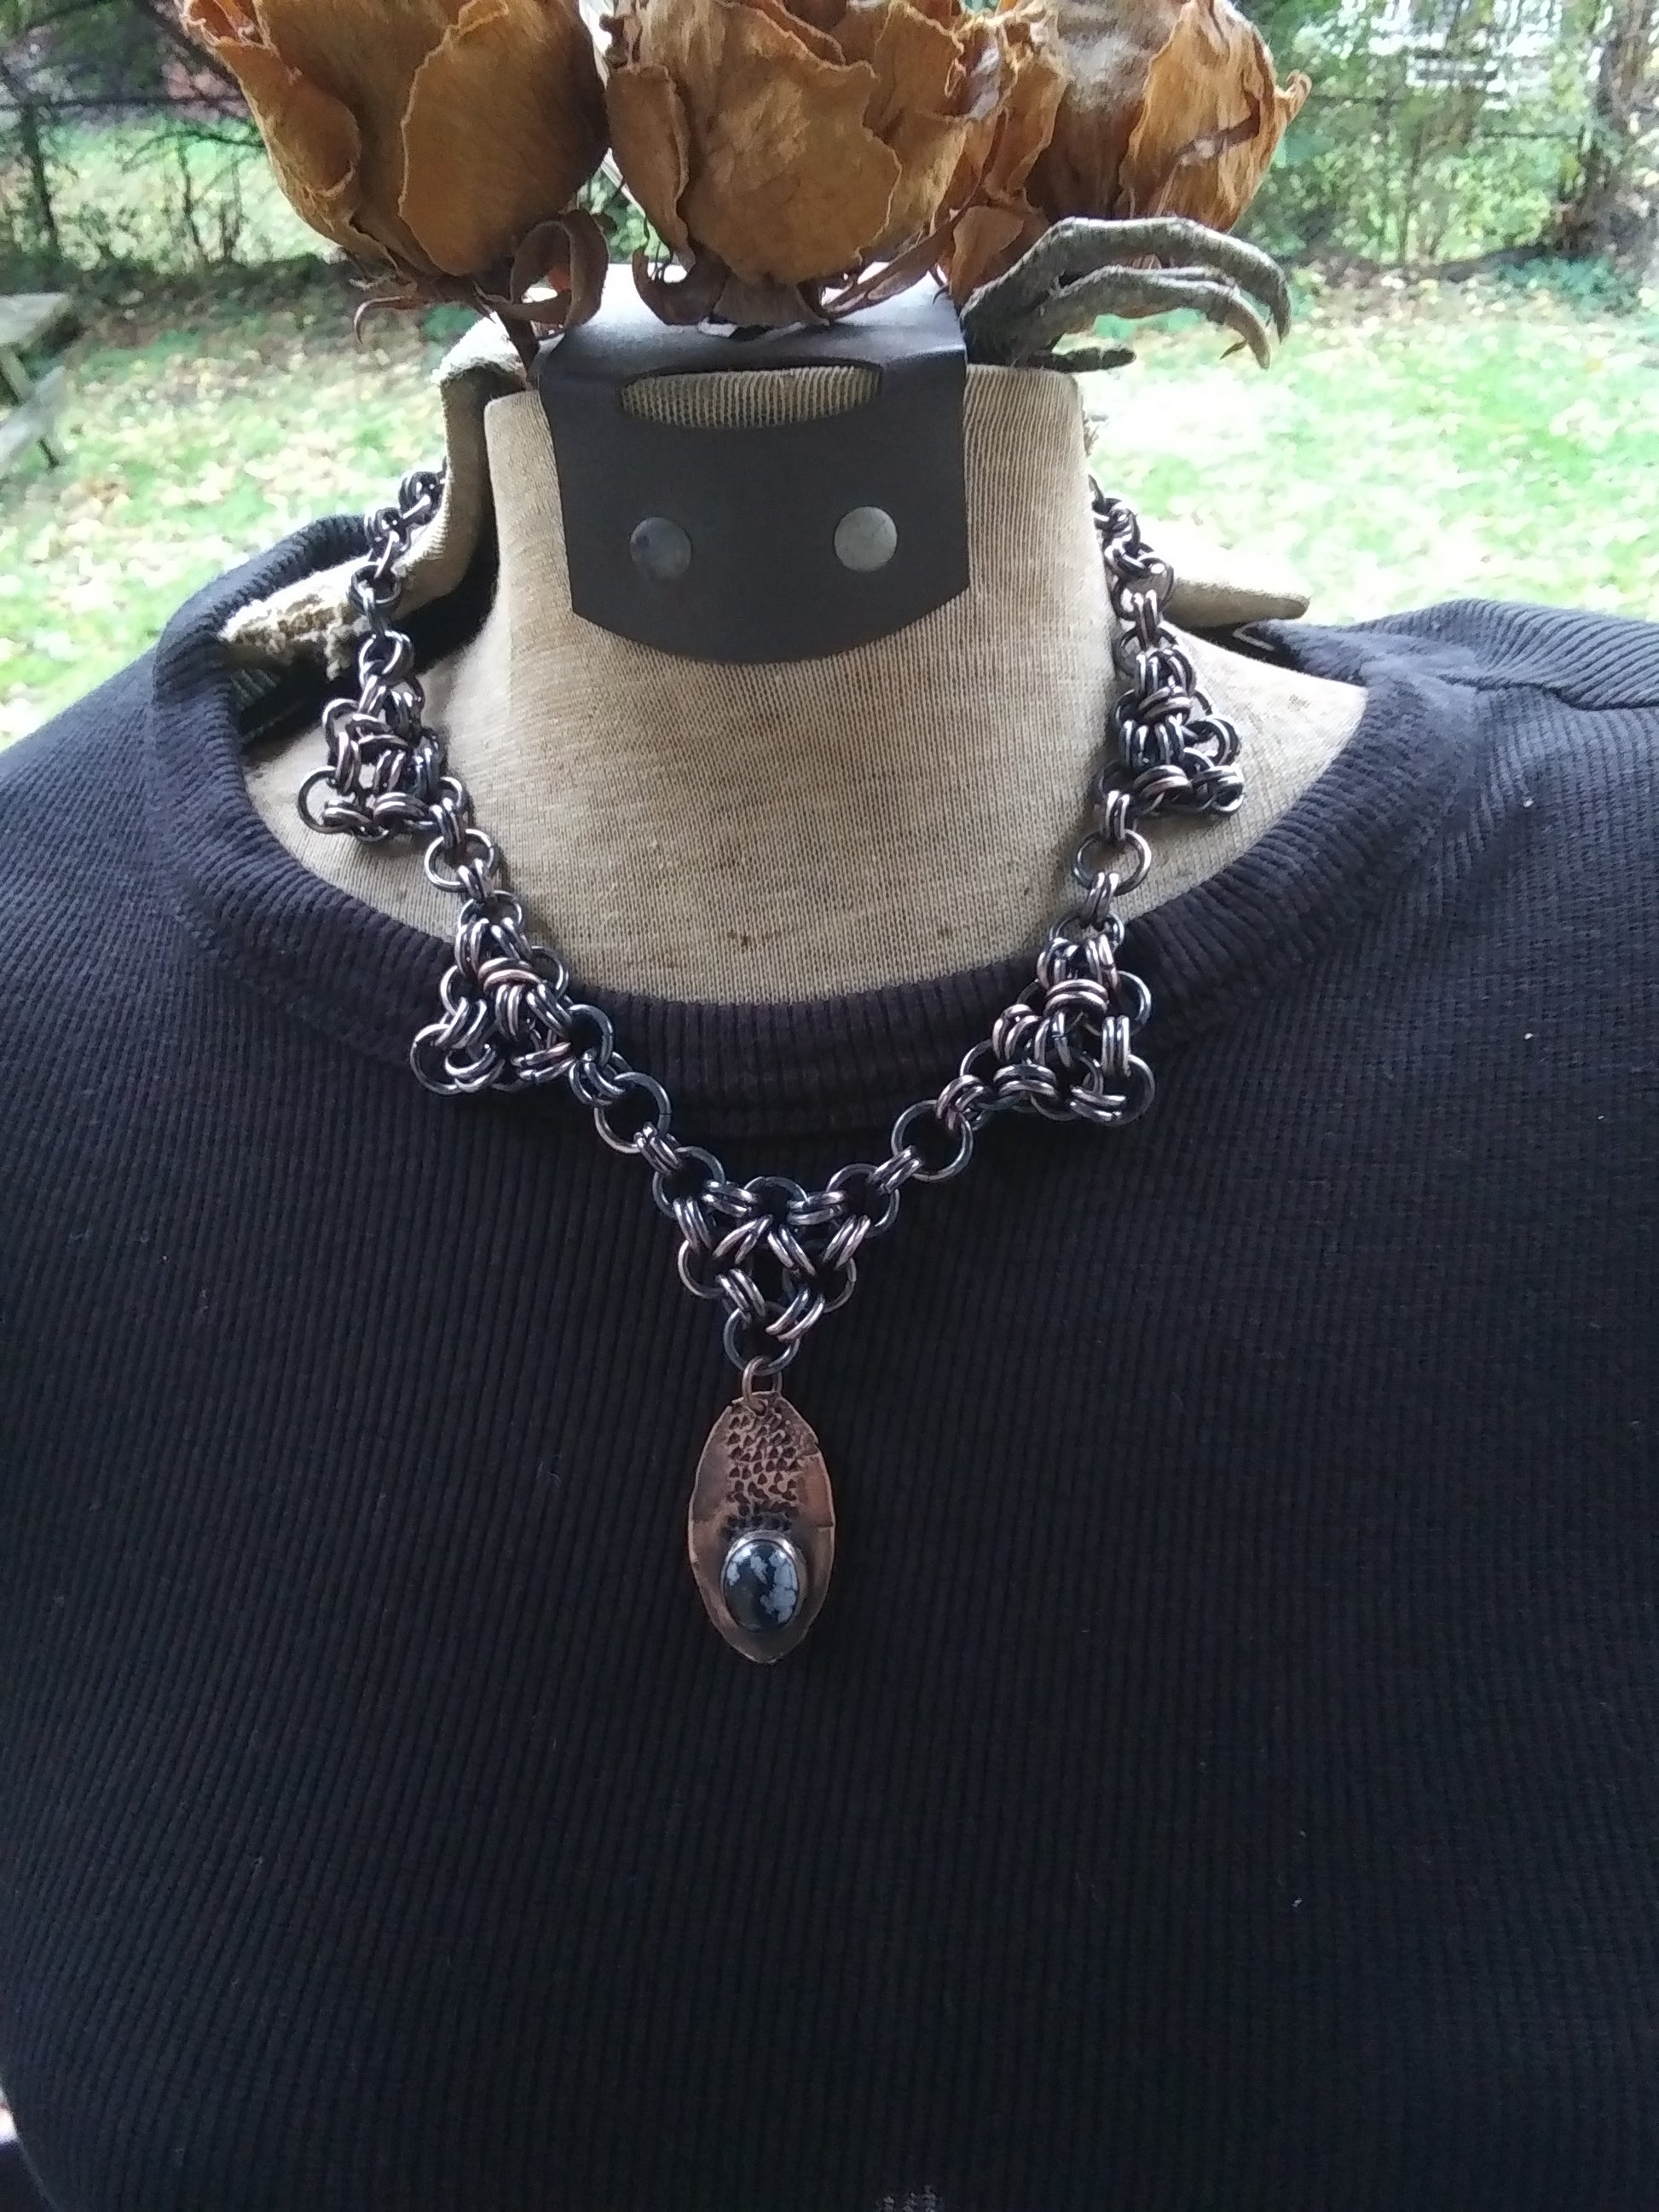 pittsburgh witch store, copper obsidian, gemstone chainmail, viking style, copper chainmail, elegant chainmail, chainmail necklace, distressed copper necklace, obsidian gemstone necklace, witchy chainmail necklace